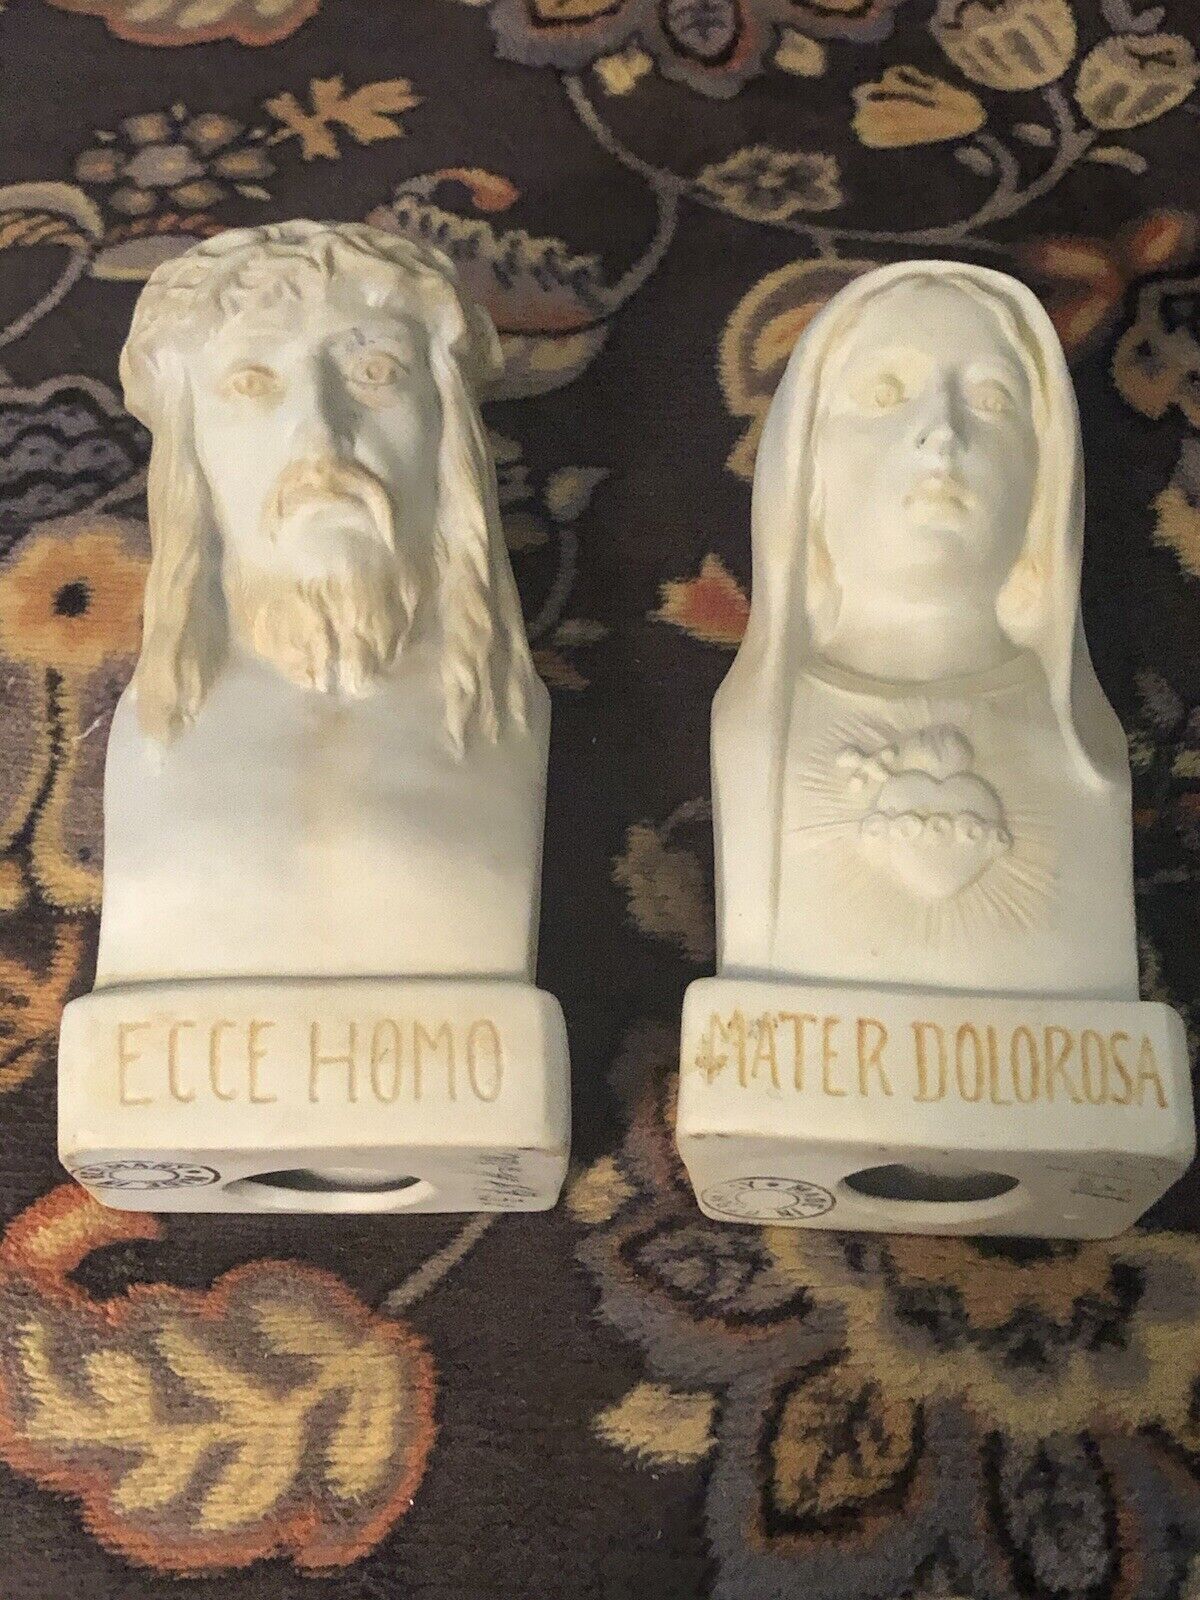 Jesus and Mary Figurines, Ecce Homo and Mater Dolorosa, Pre-WWII Germany 